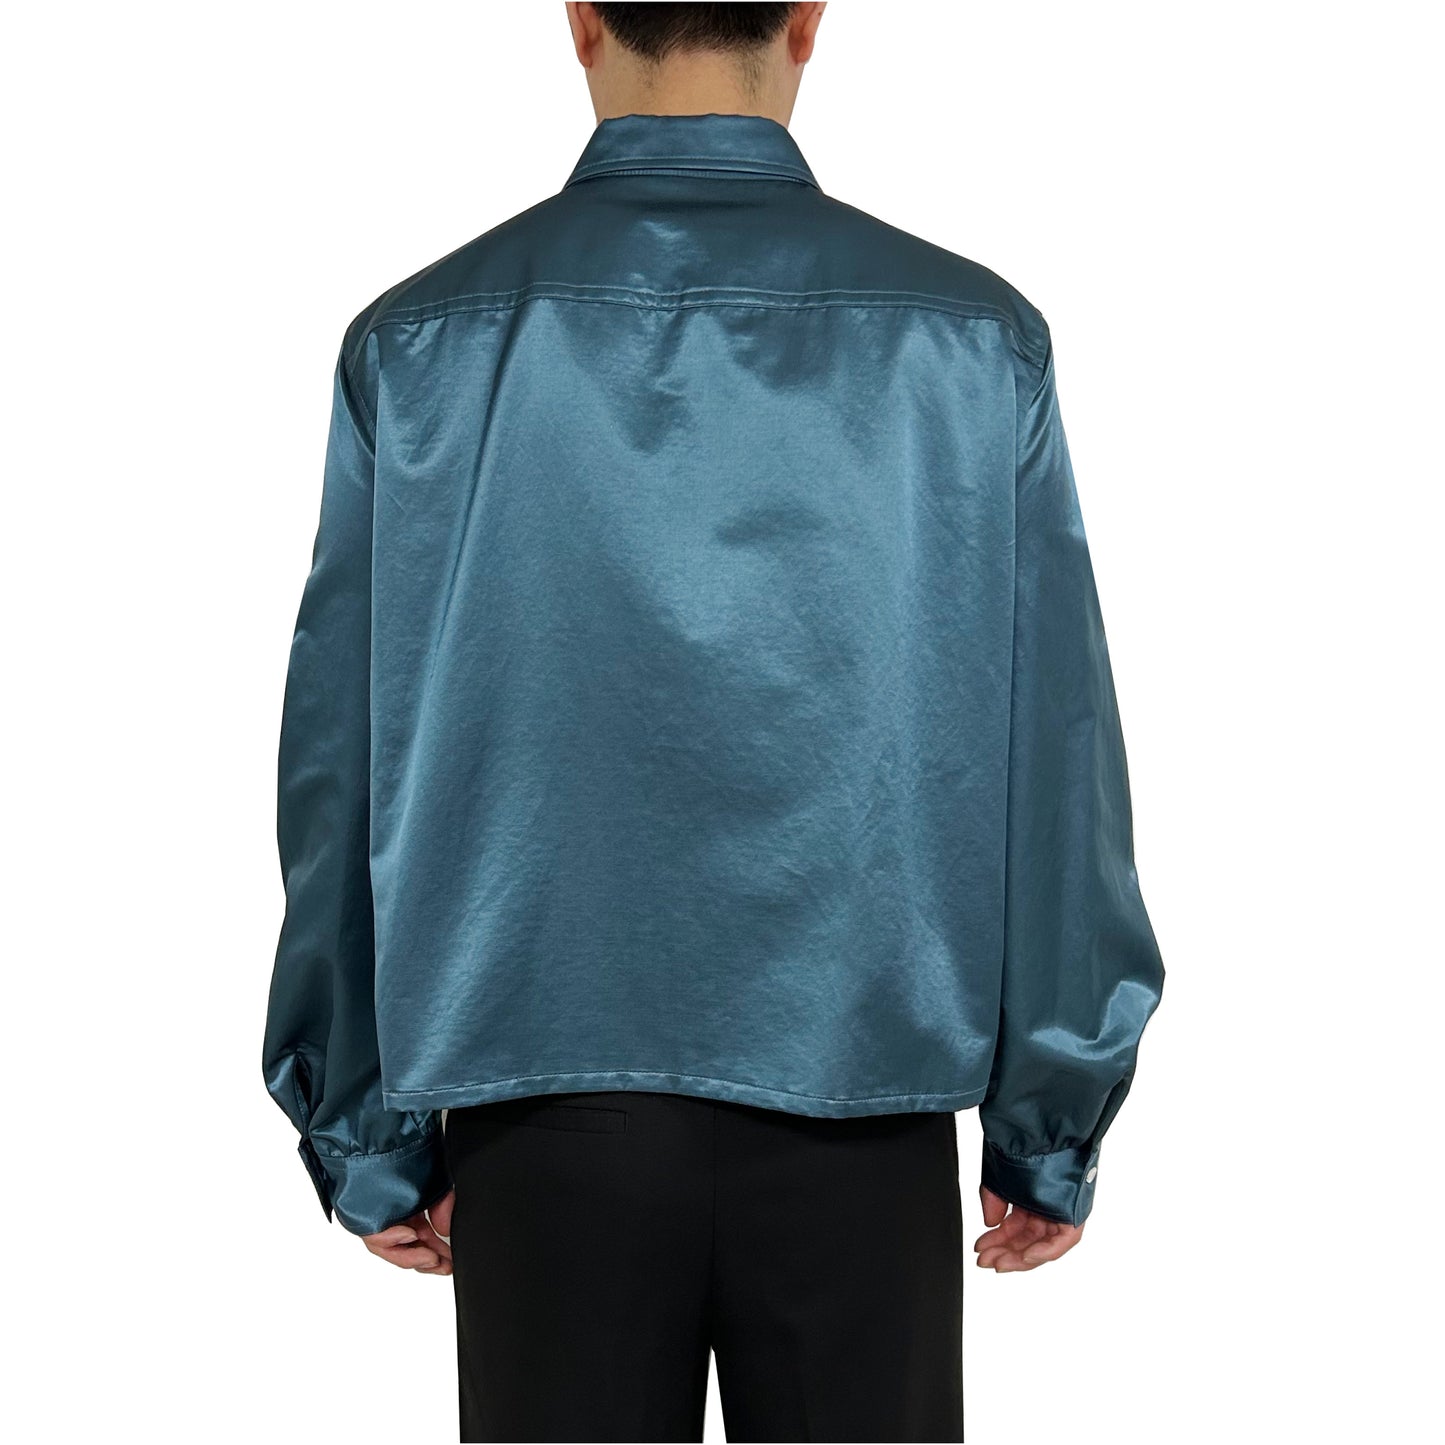 Satin Military Blouse in Teal Blue